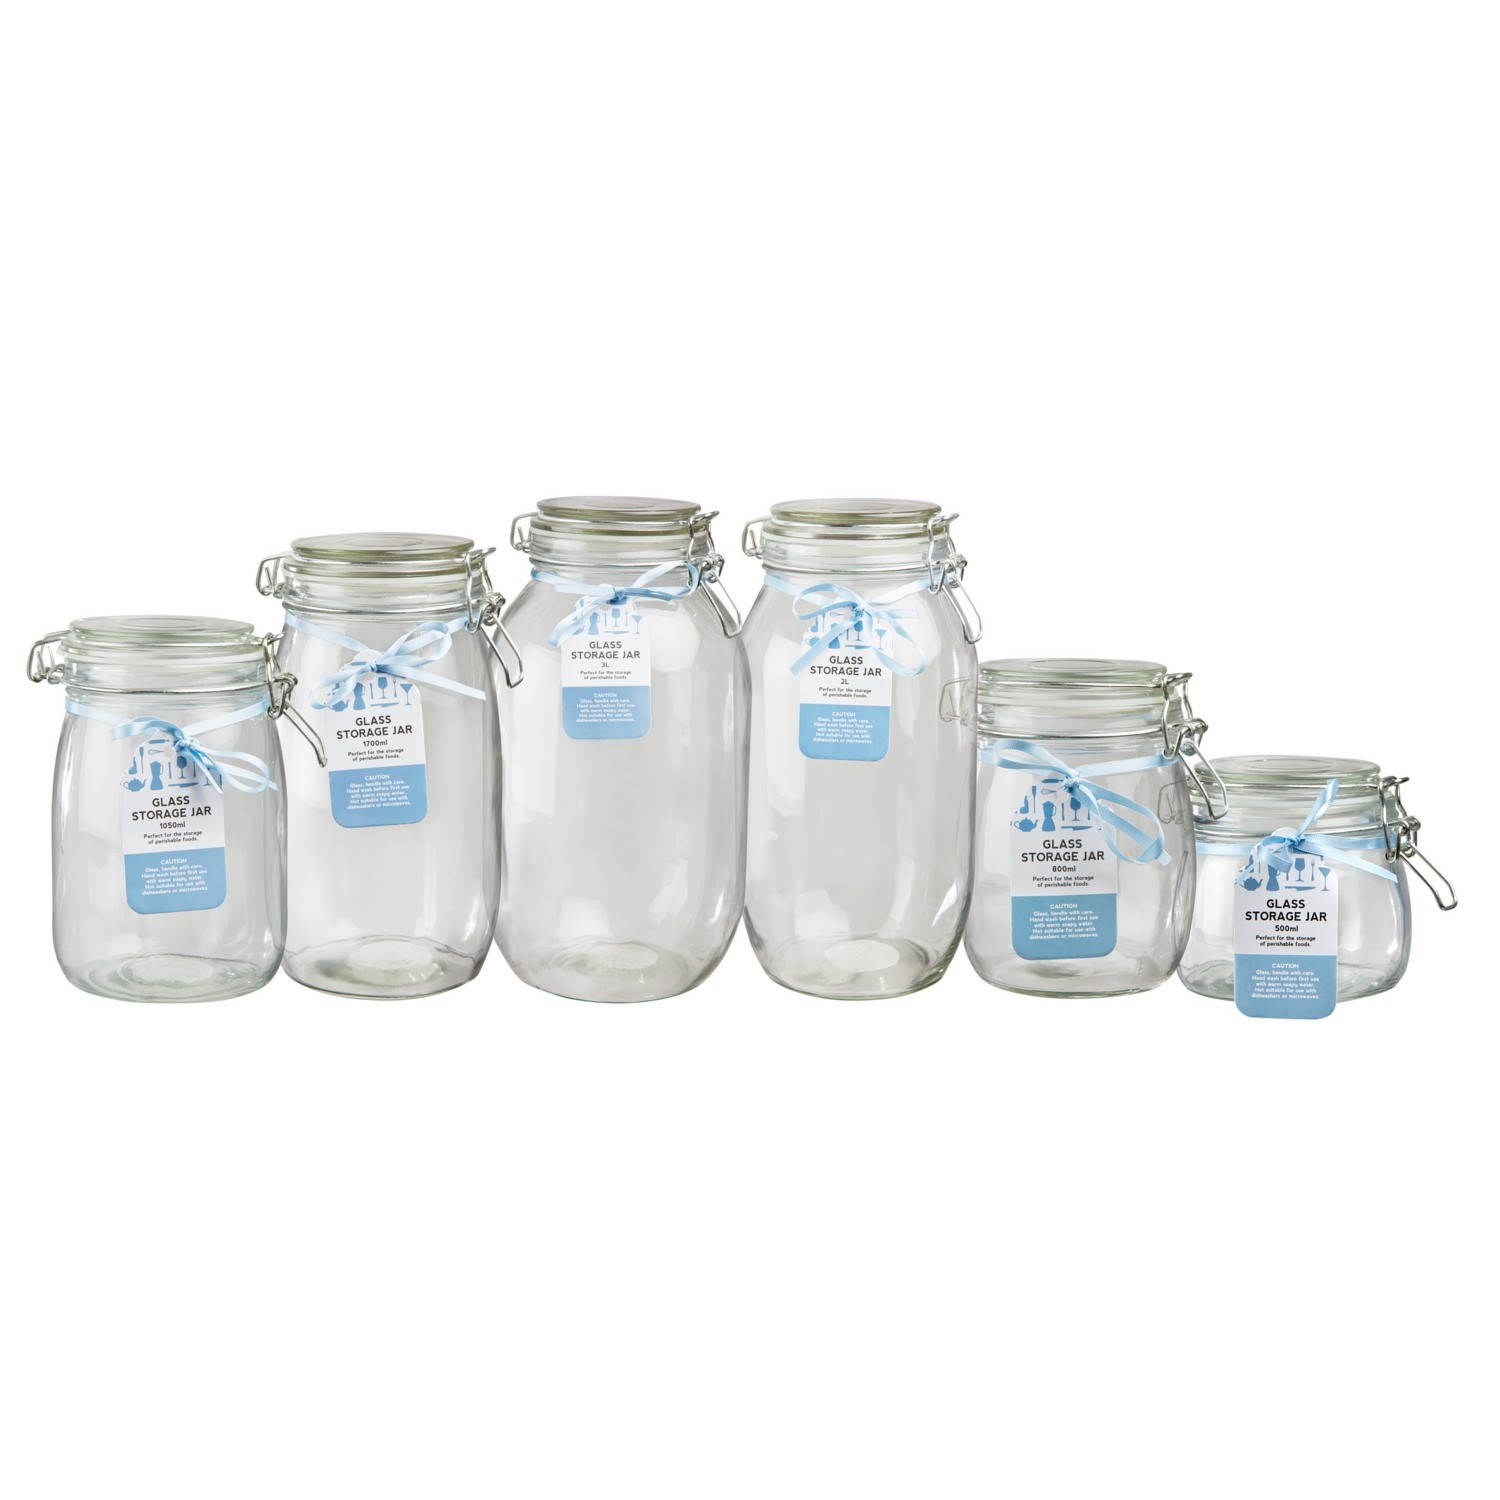 My Home 1.05L Clear Glass Storage Jar with Clip Lid Image 2